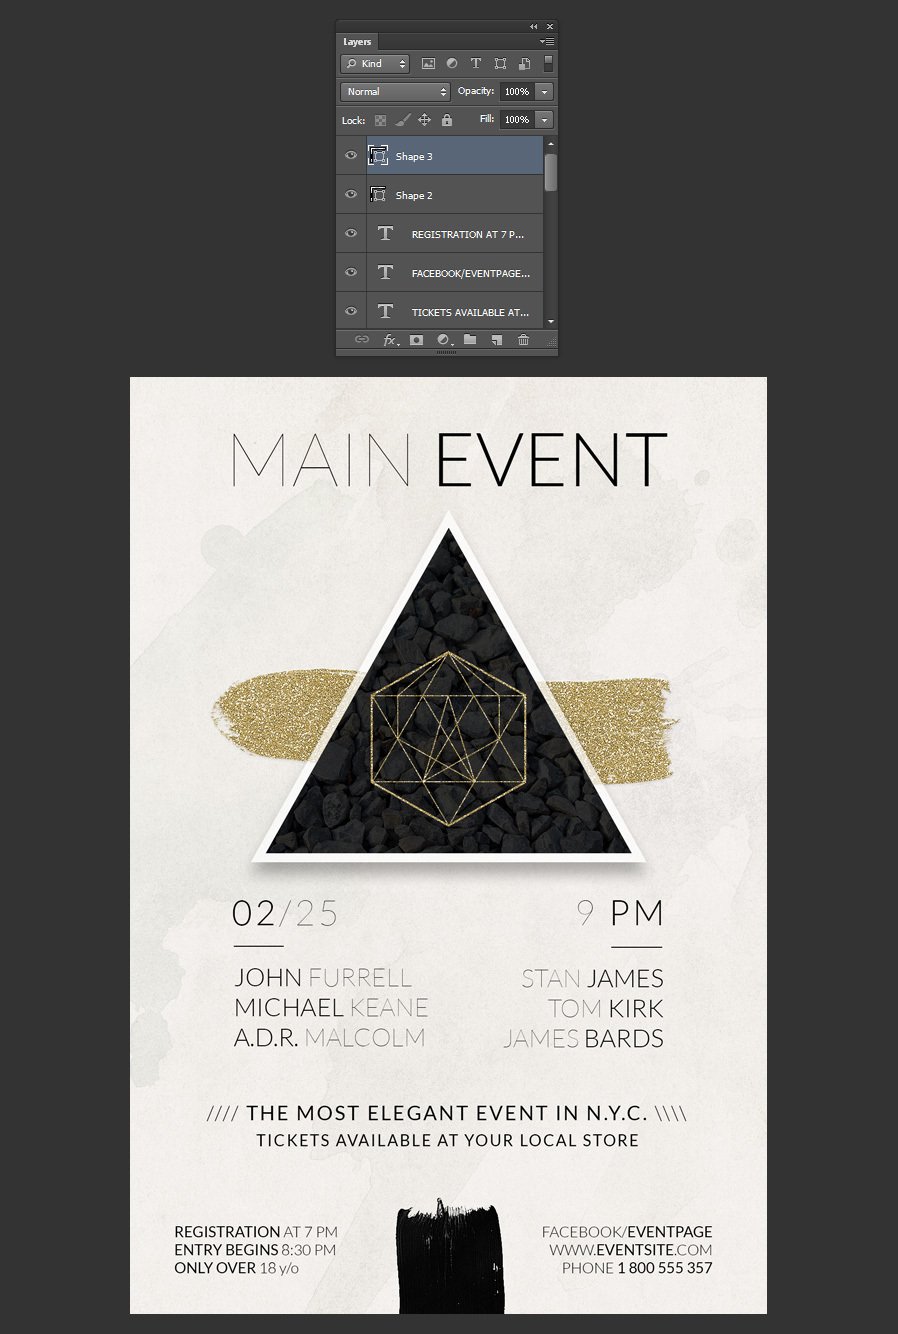 How To Design An Elegant Event Flyer In Photoshop Medialoot